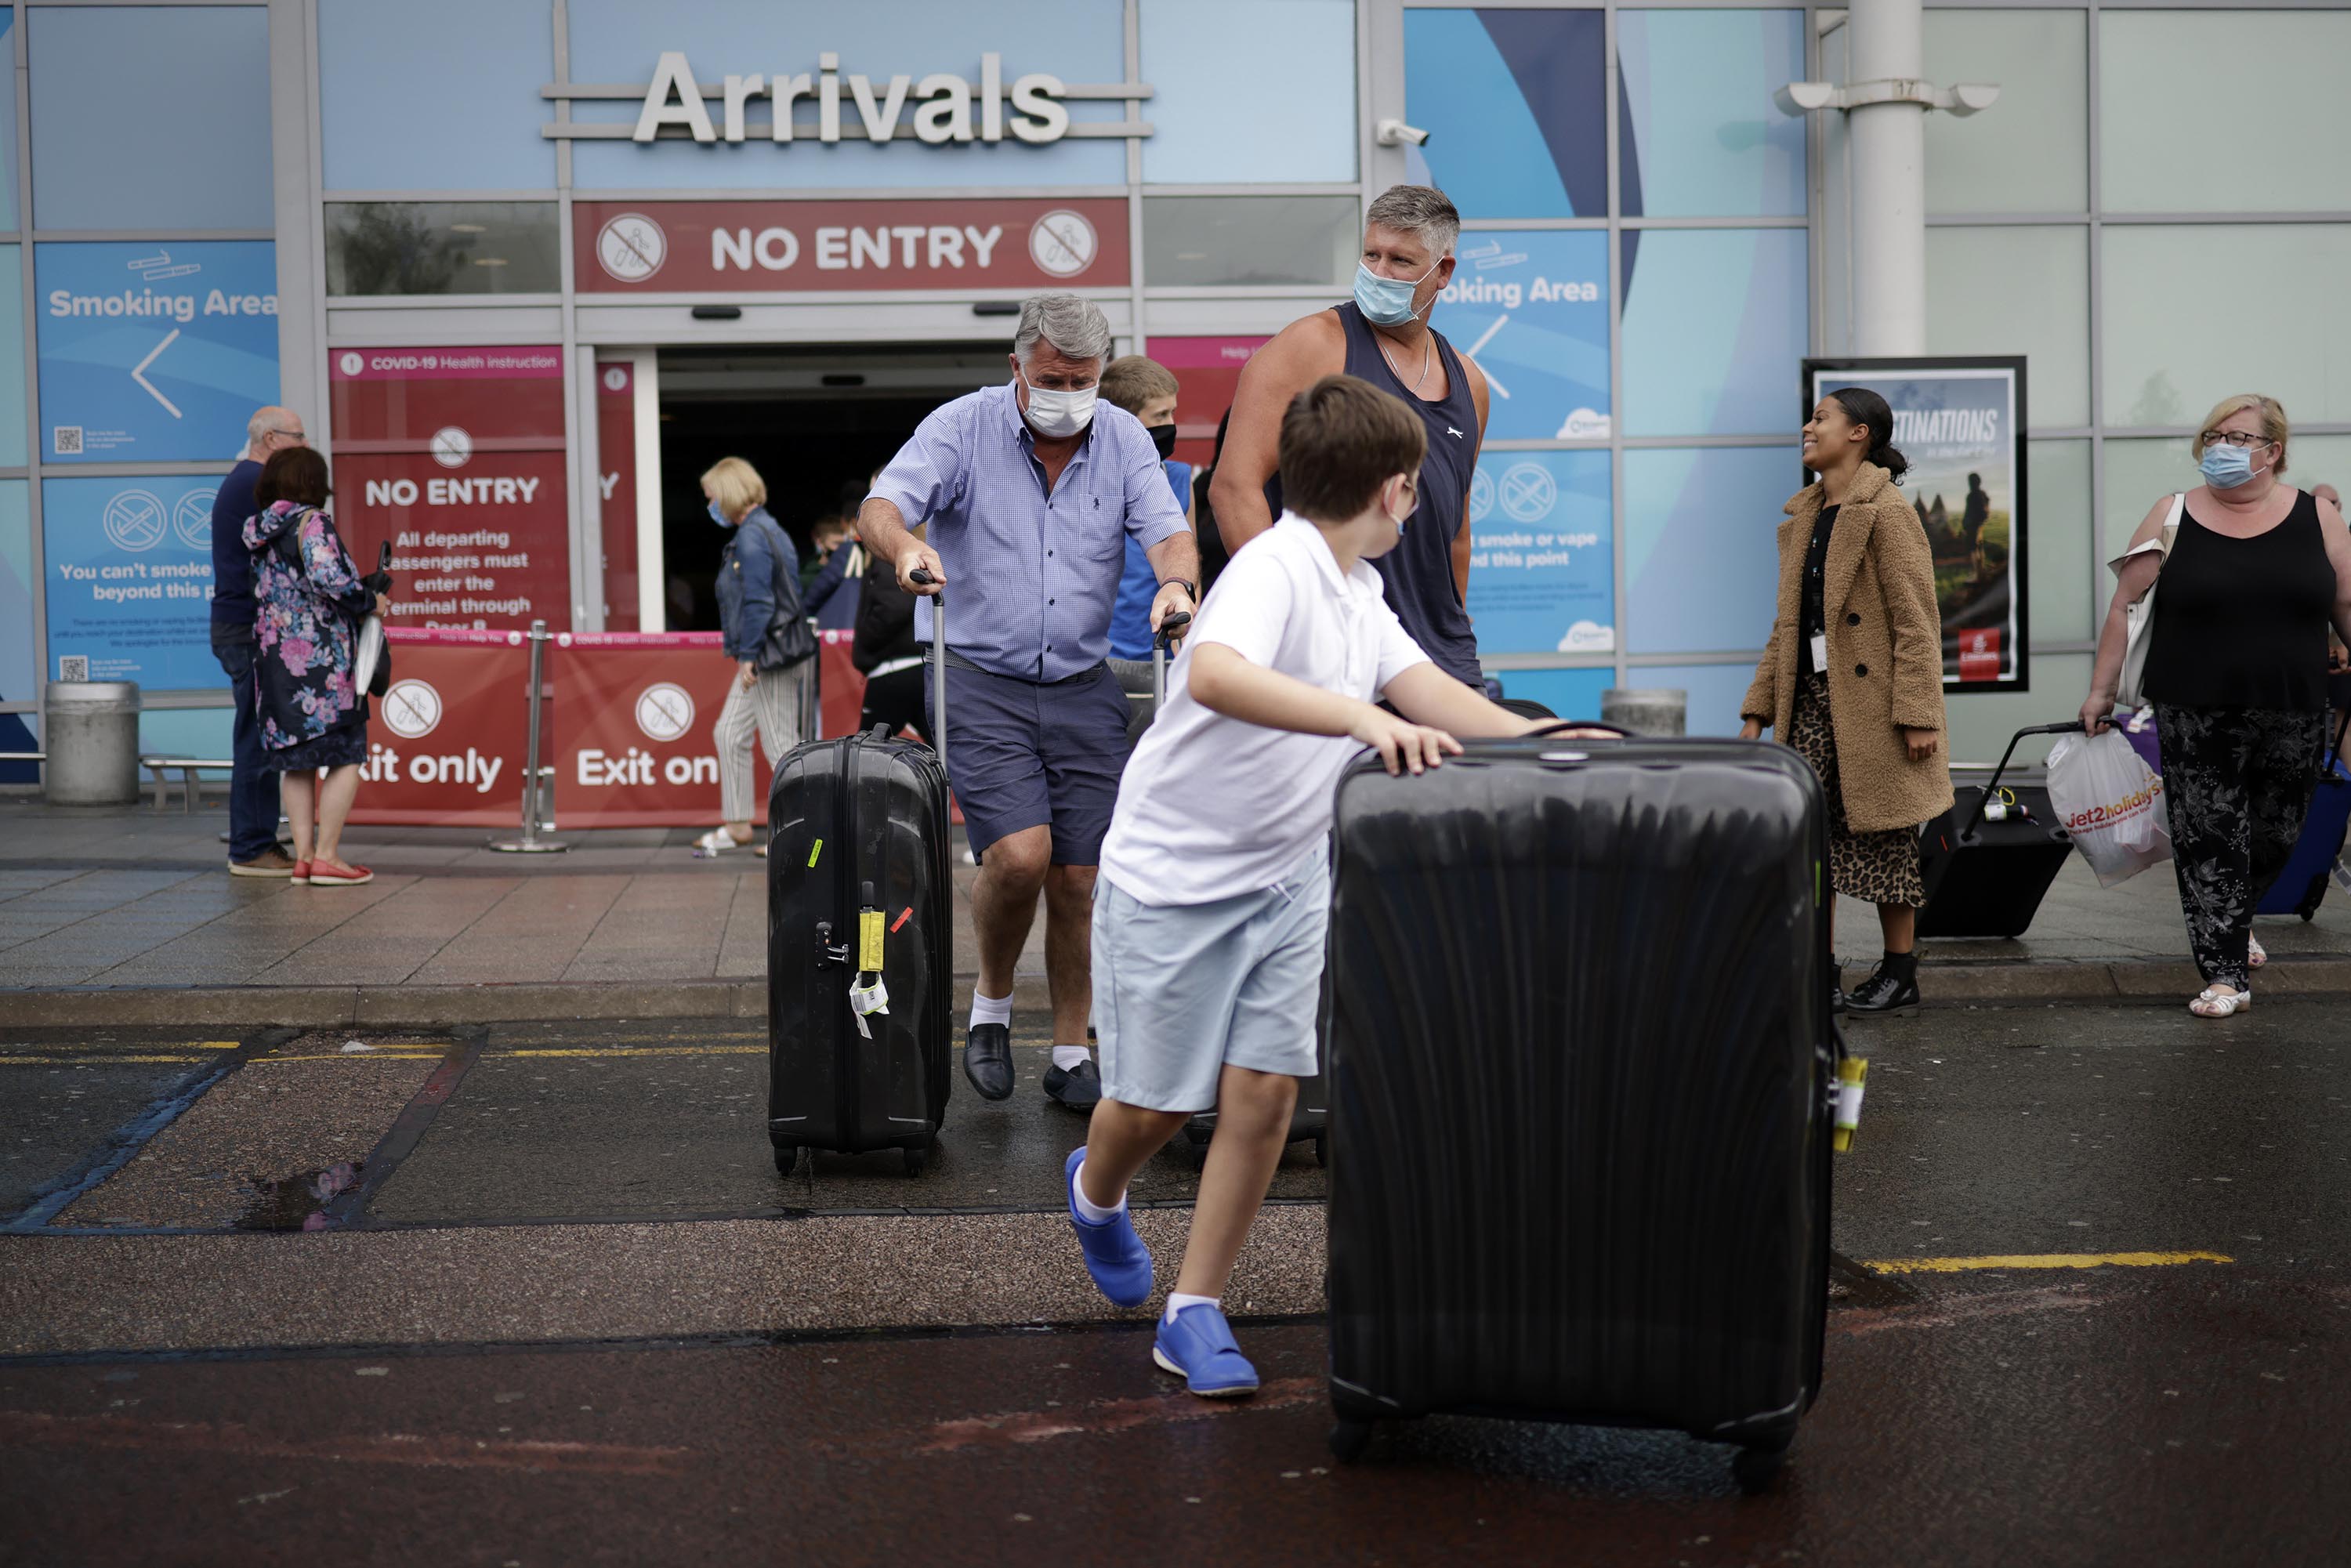 Travelers exit the arrivals terminal at Birmingham Airport on July 27, in Birmingham, England.